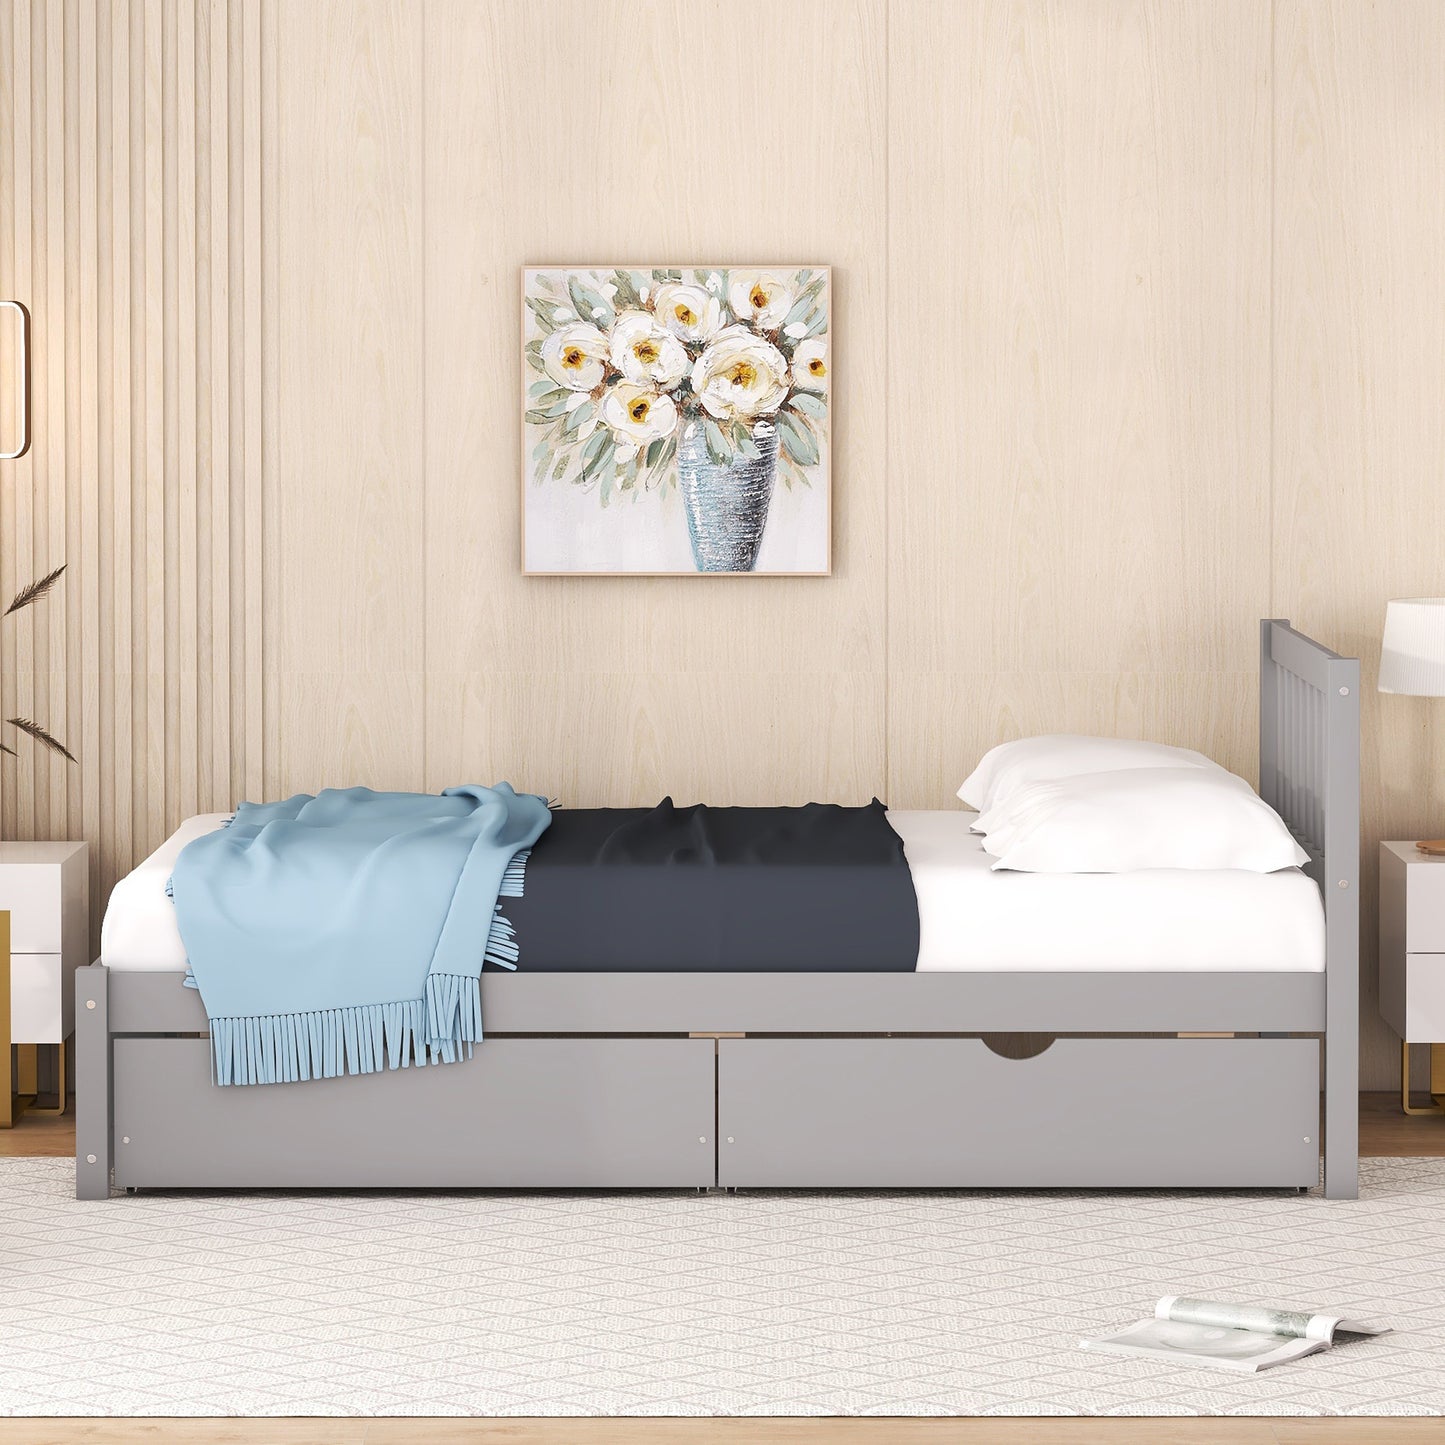 Modern Design Wooden Twin Size Platform Bed with 2 Drawers for Grey Color